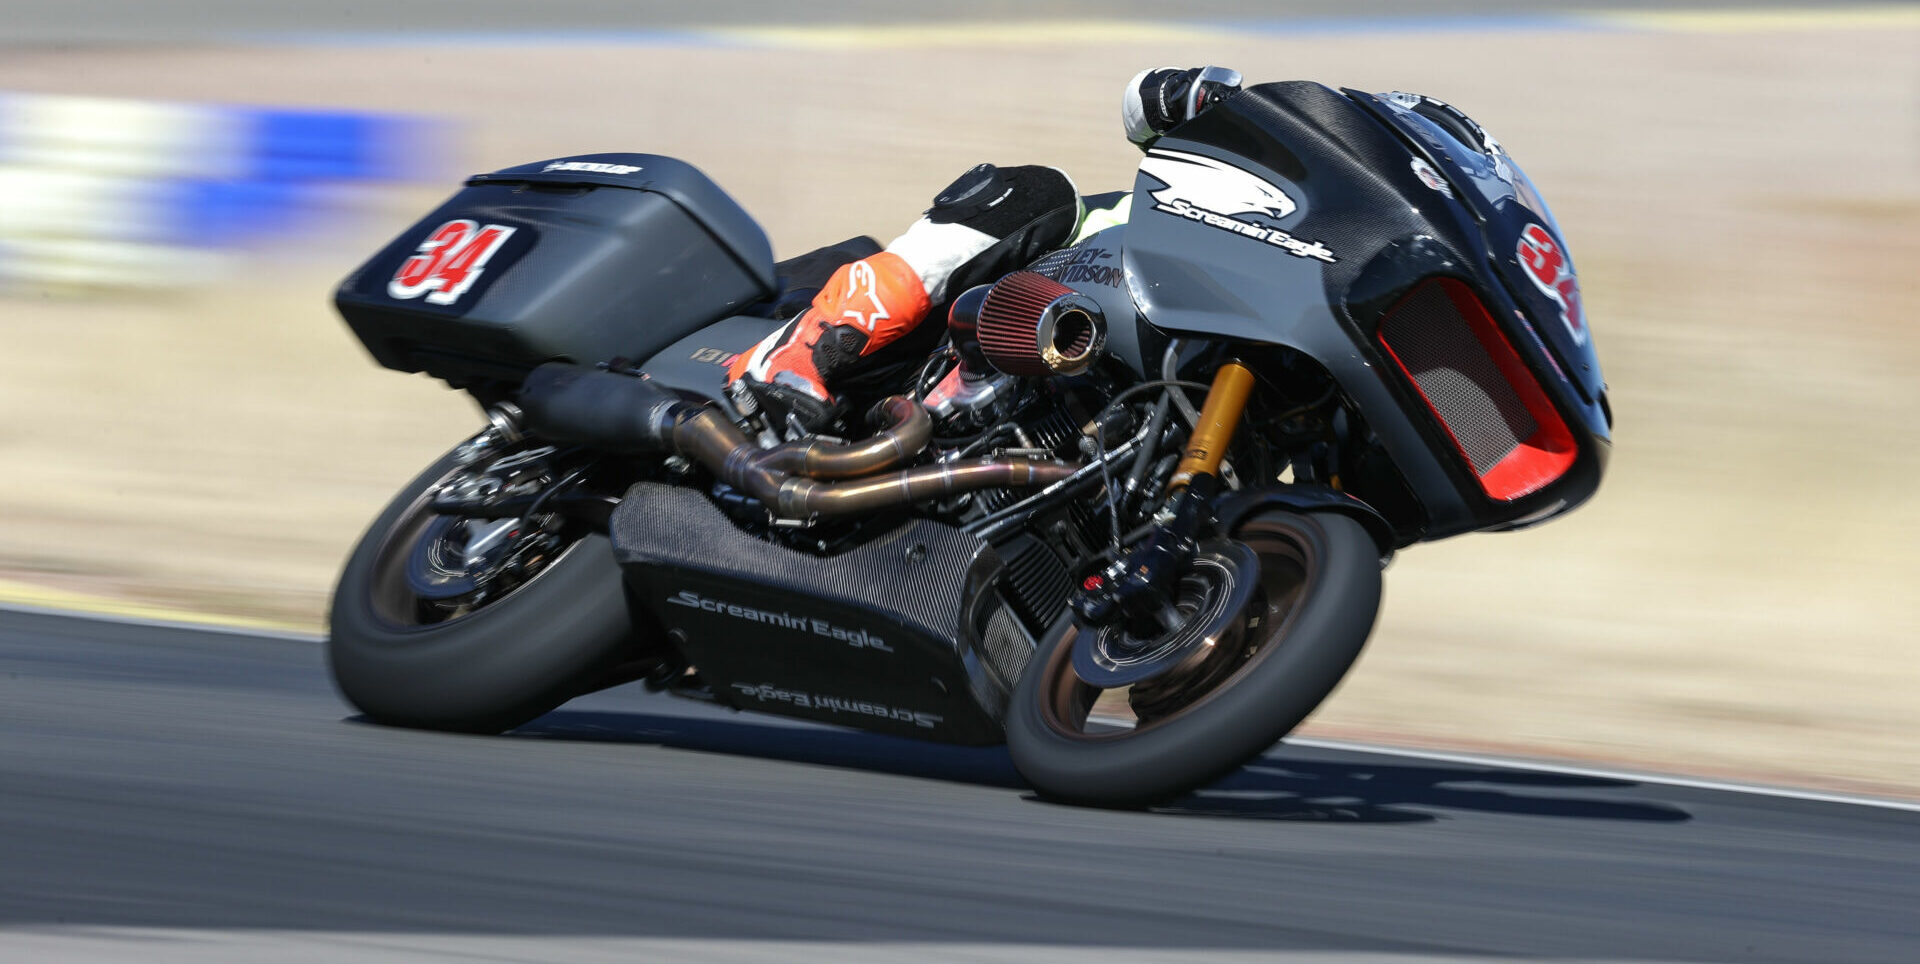 Both Kyle and Travis Wyman have won MotoAmerica Mission King Of The Baggers races, and Cody has worked behind the scenes as a test rider. Photo courtesy Harley-Davidson.